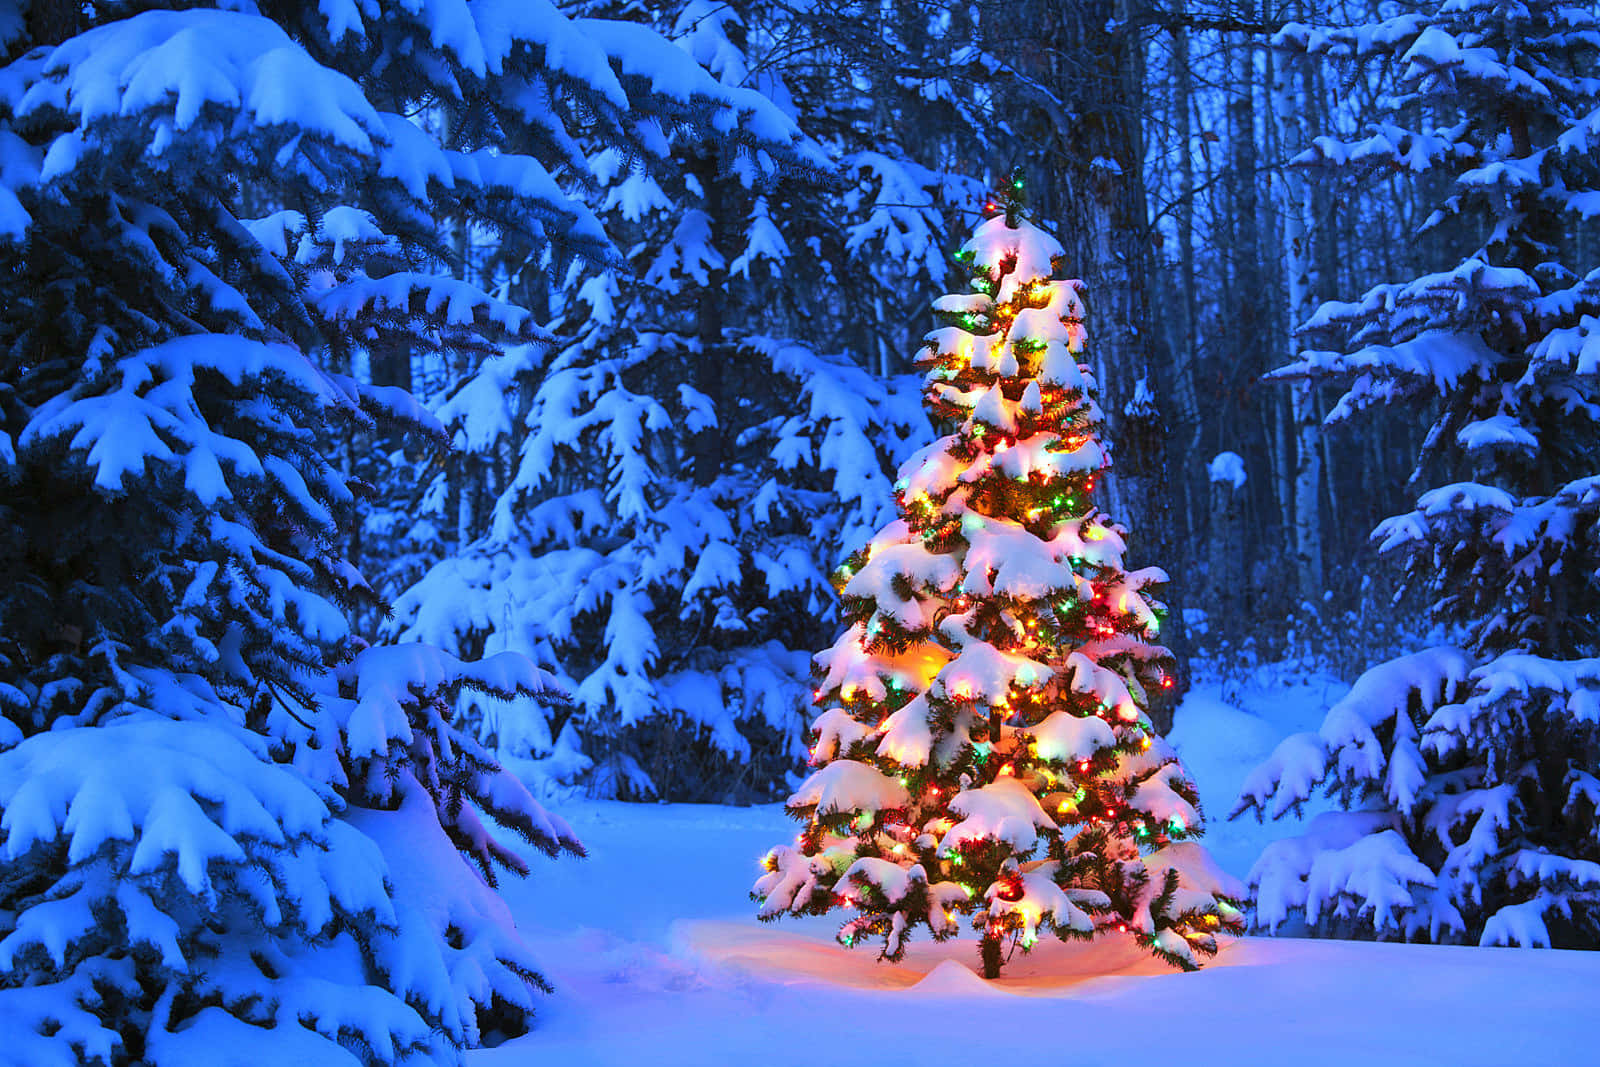 Download Christmas Tree&Snow Pictures | Wallpapers.com